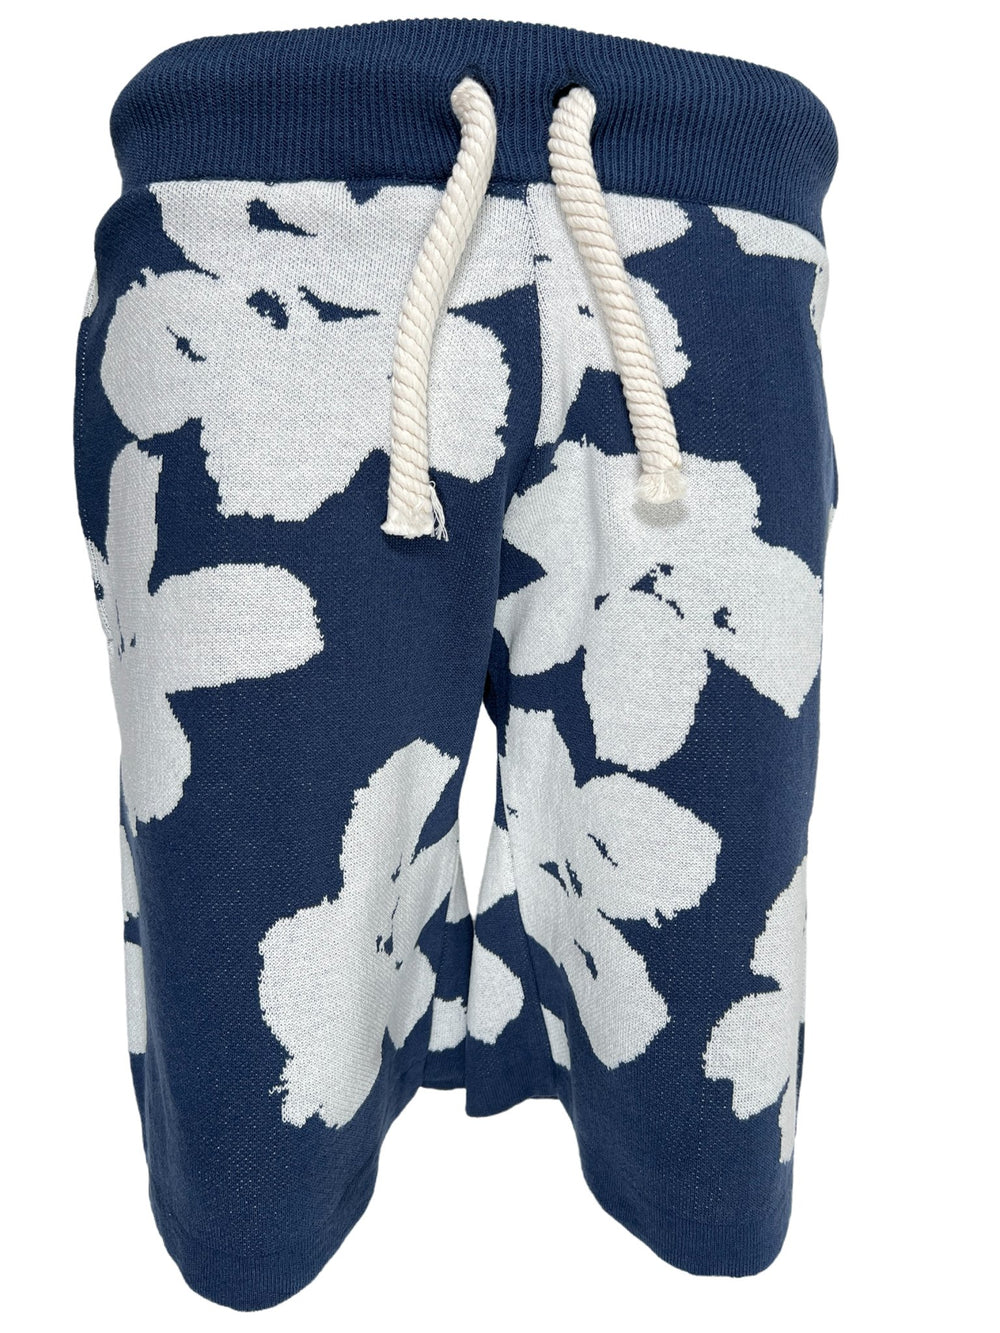 Navy blue and white floral print FAMILY FIRST JOSS2403 jogger shorts with drawstring waist. Made in Italy.